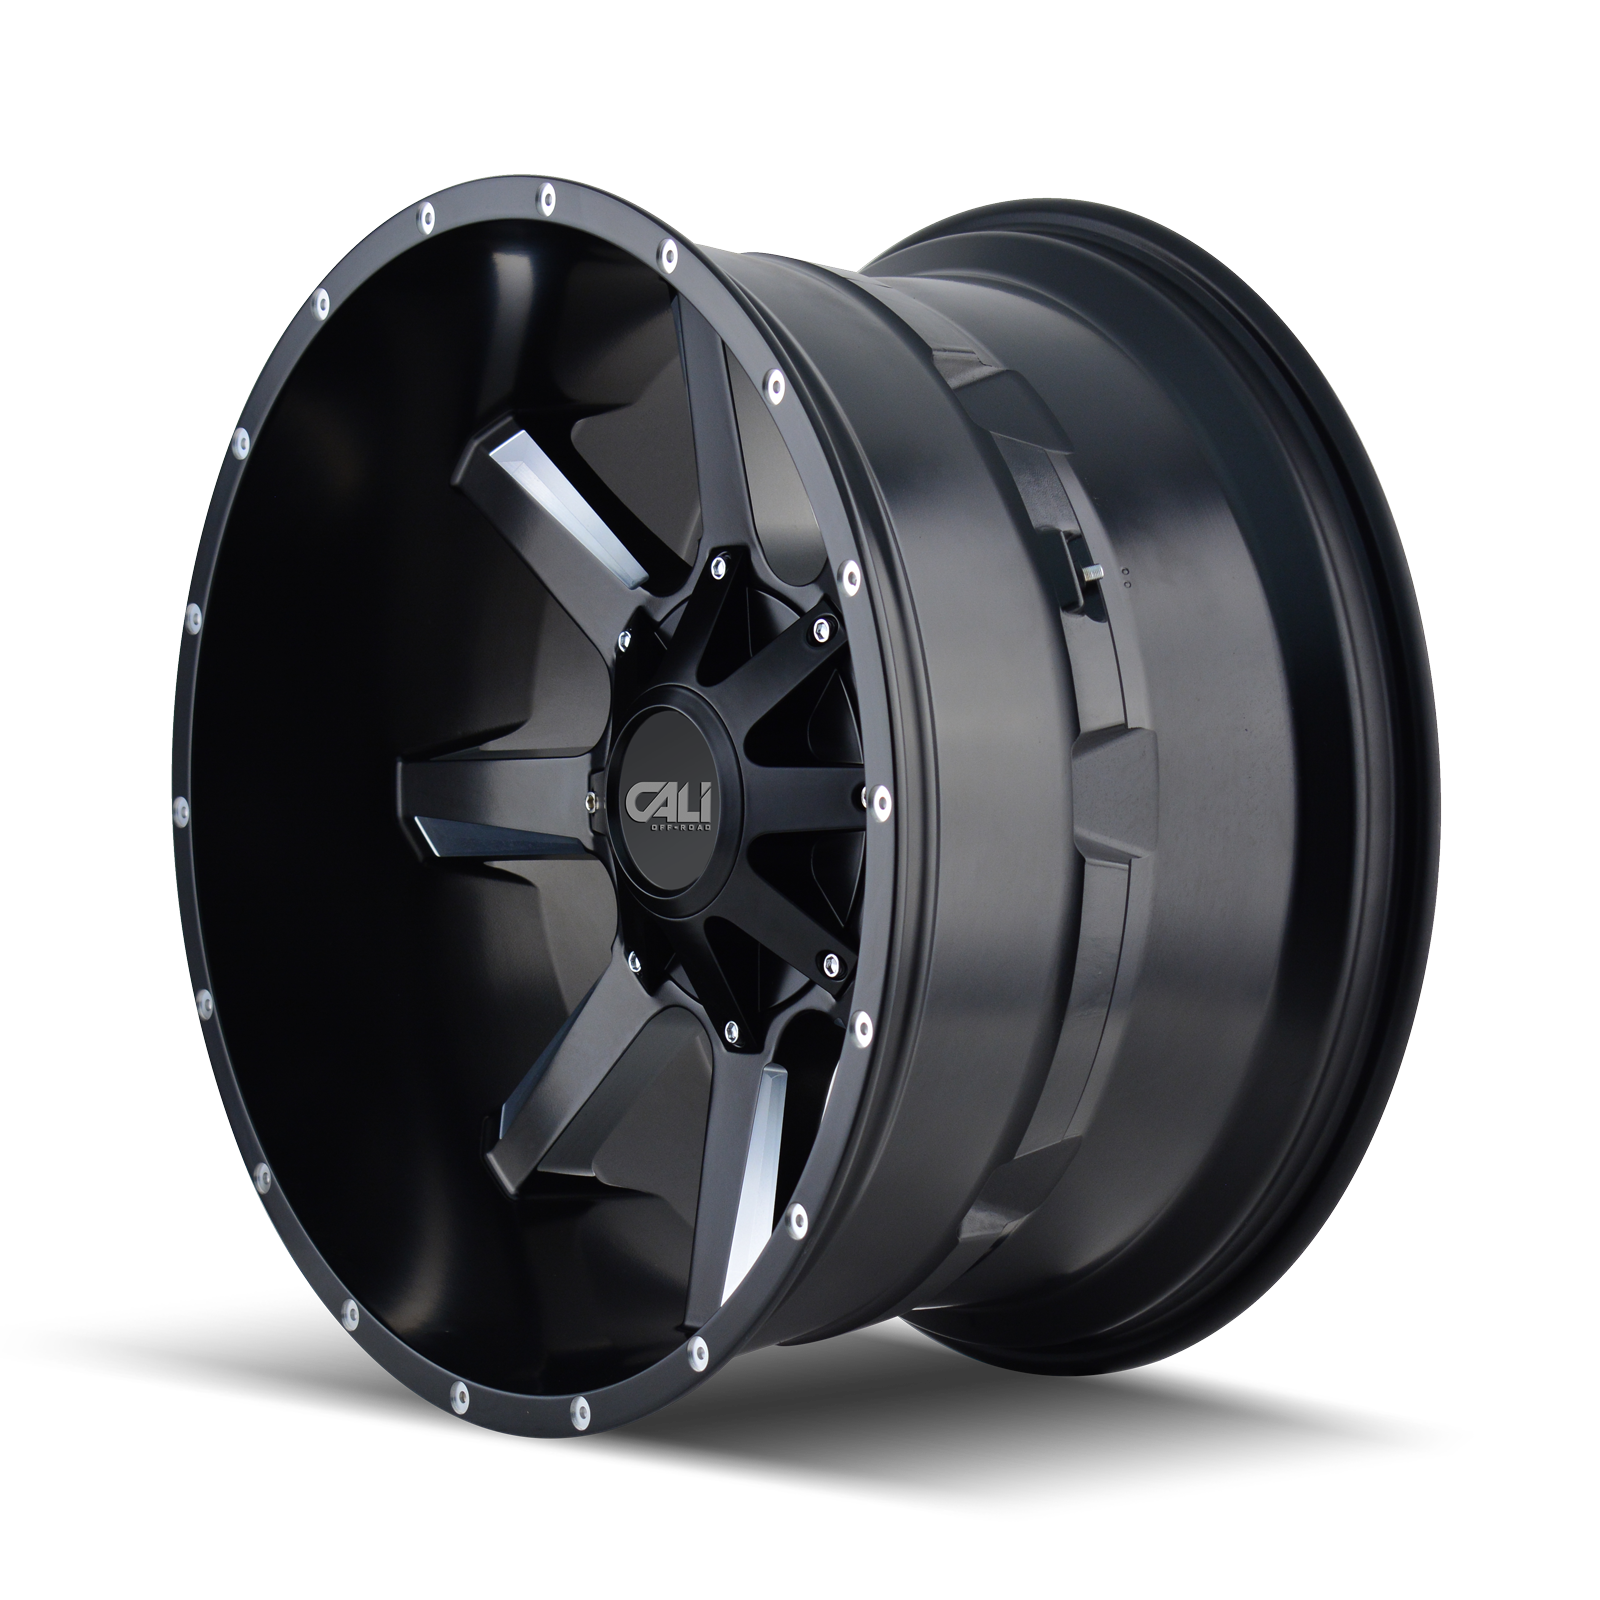 Cali Off-road BUSTED Satin black milled 20x9 0 8x180mm 124.1mm - WheelWiz